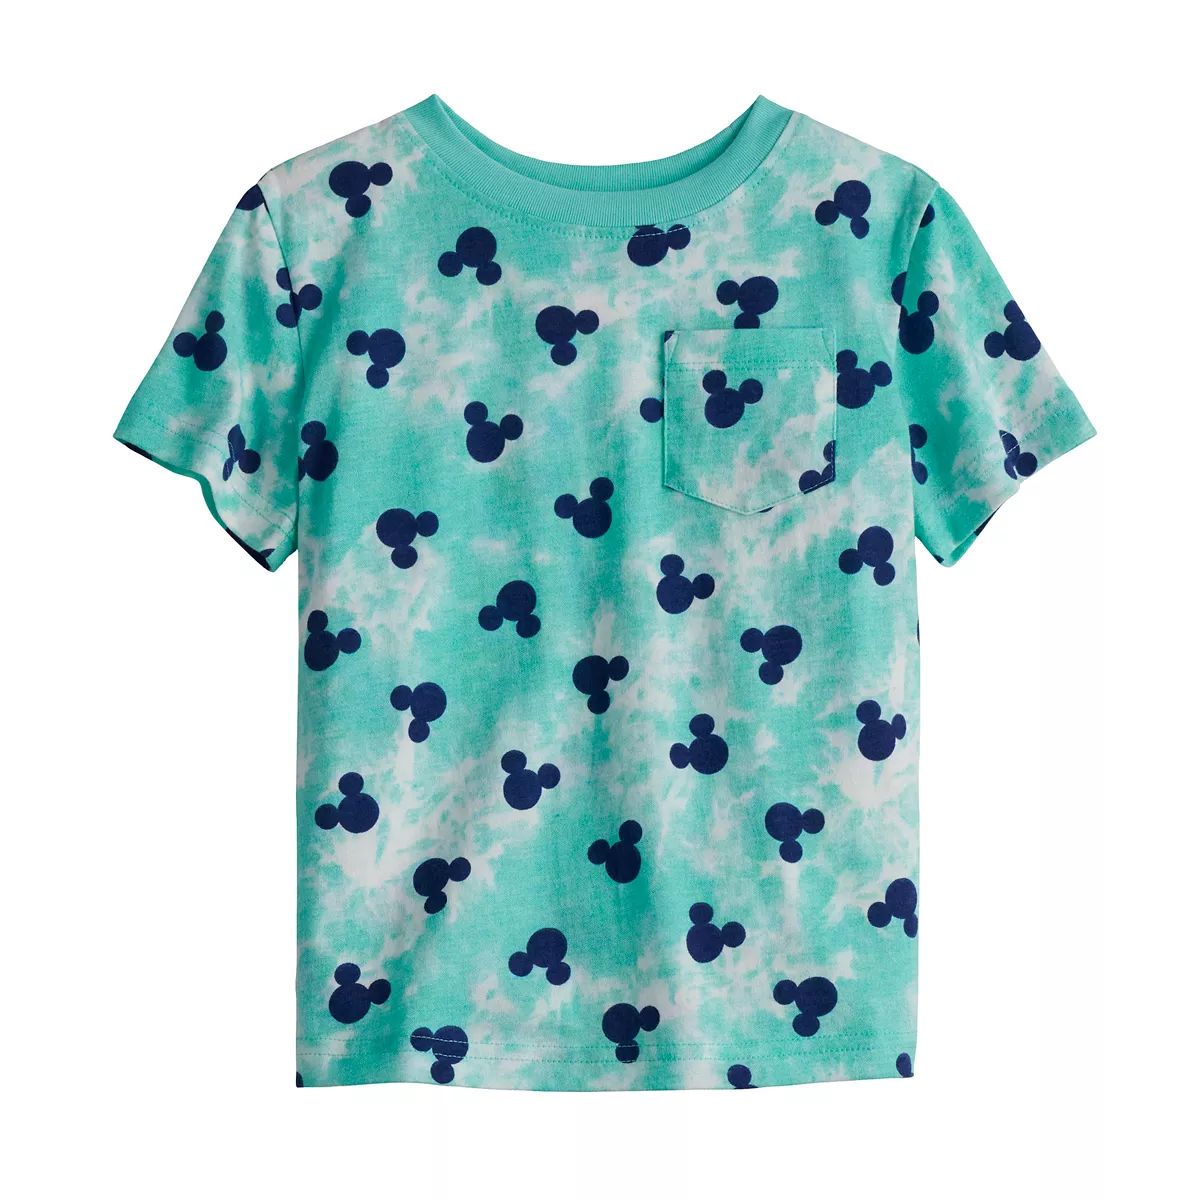 Disney's Mickey Mouse Toddler Boy Graphic Tee by Jumping Beans® | Kohl's